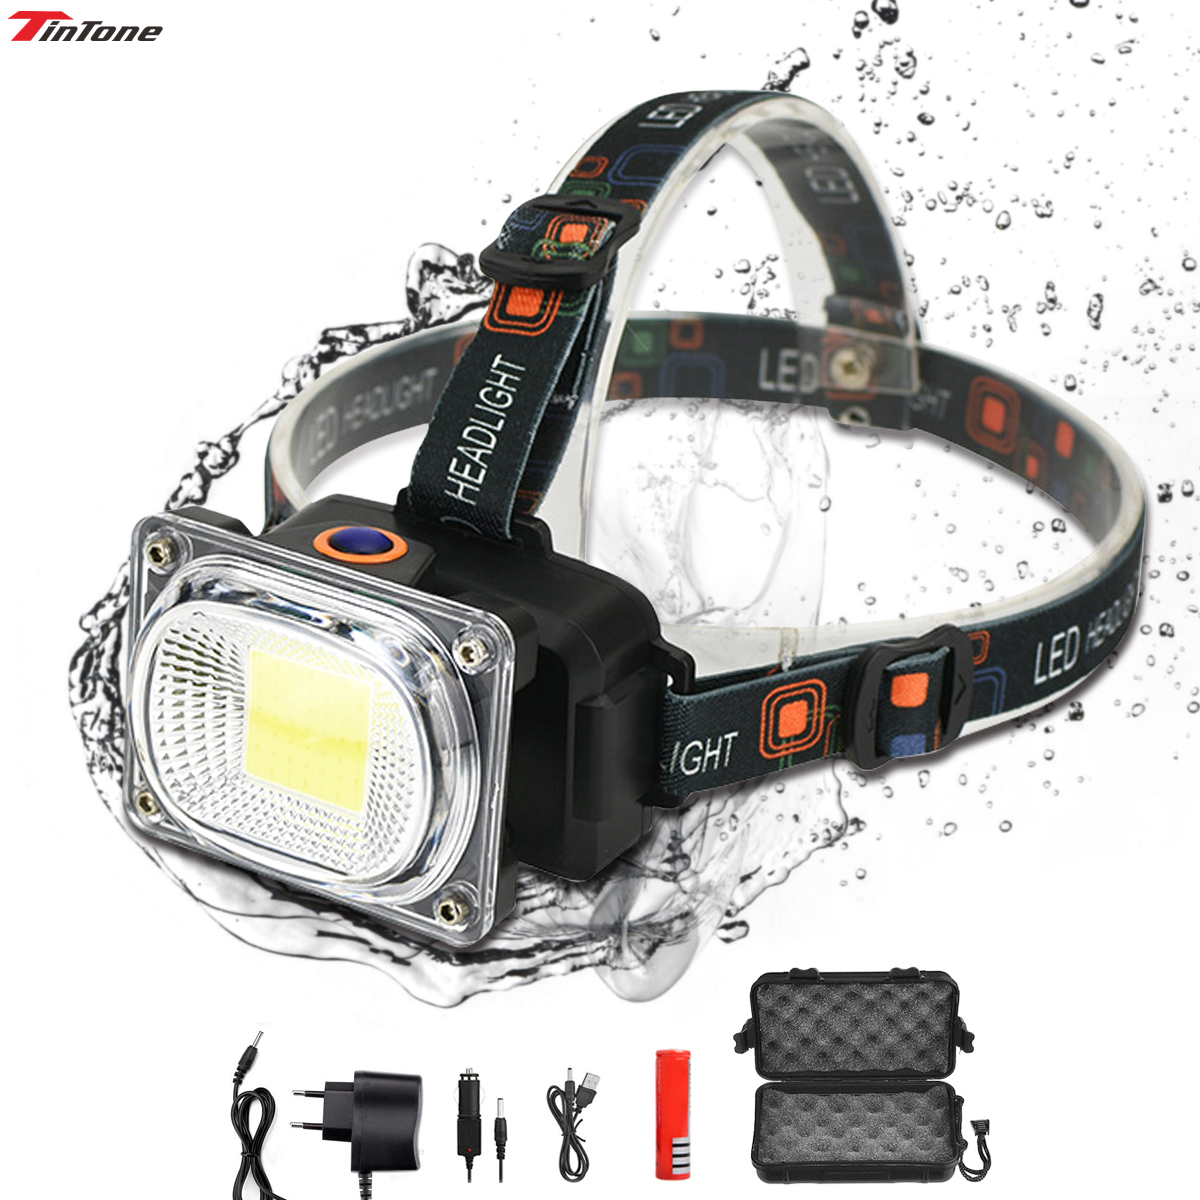 6000LM Bright COB LED Headlamp Outdoor Camping Fishing WorkLight Portable Searchlight lantern 2021